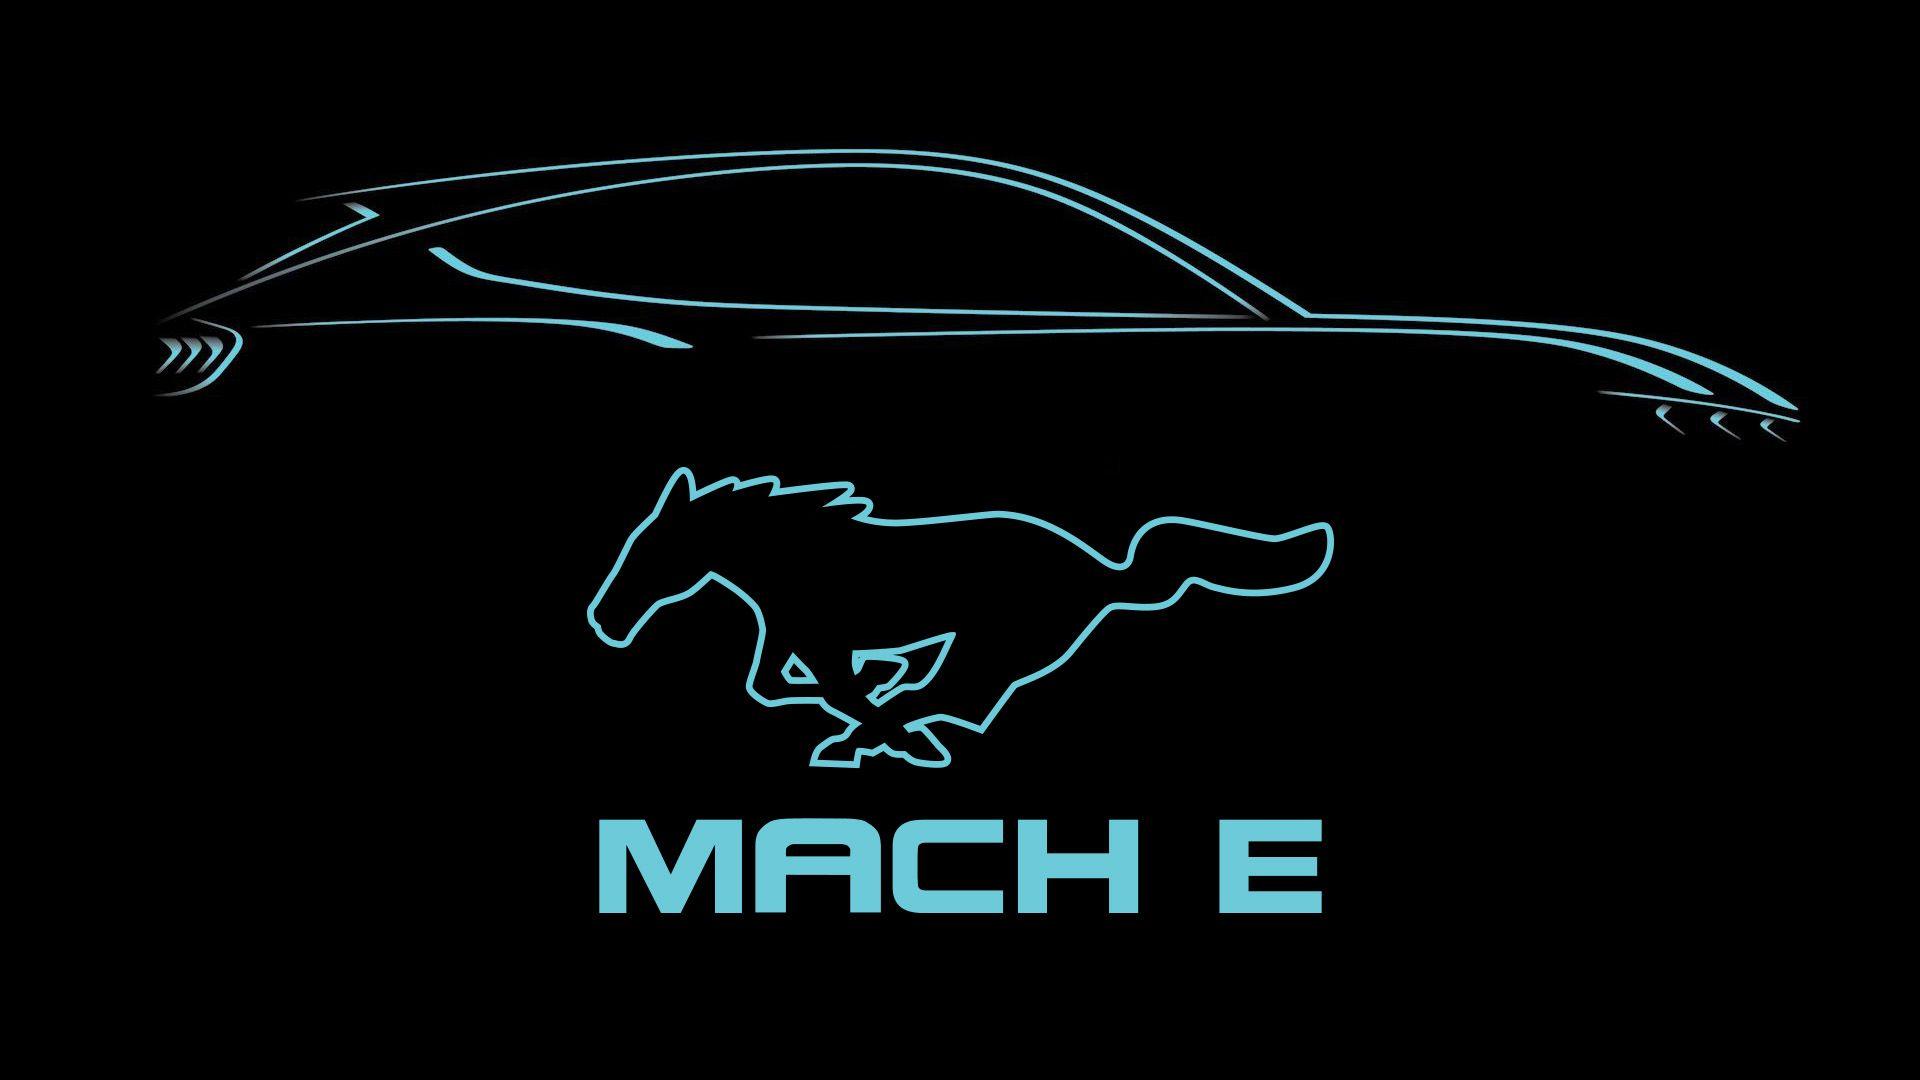 Watch The Ford Mustang Mach E Reveal